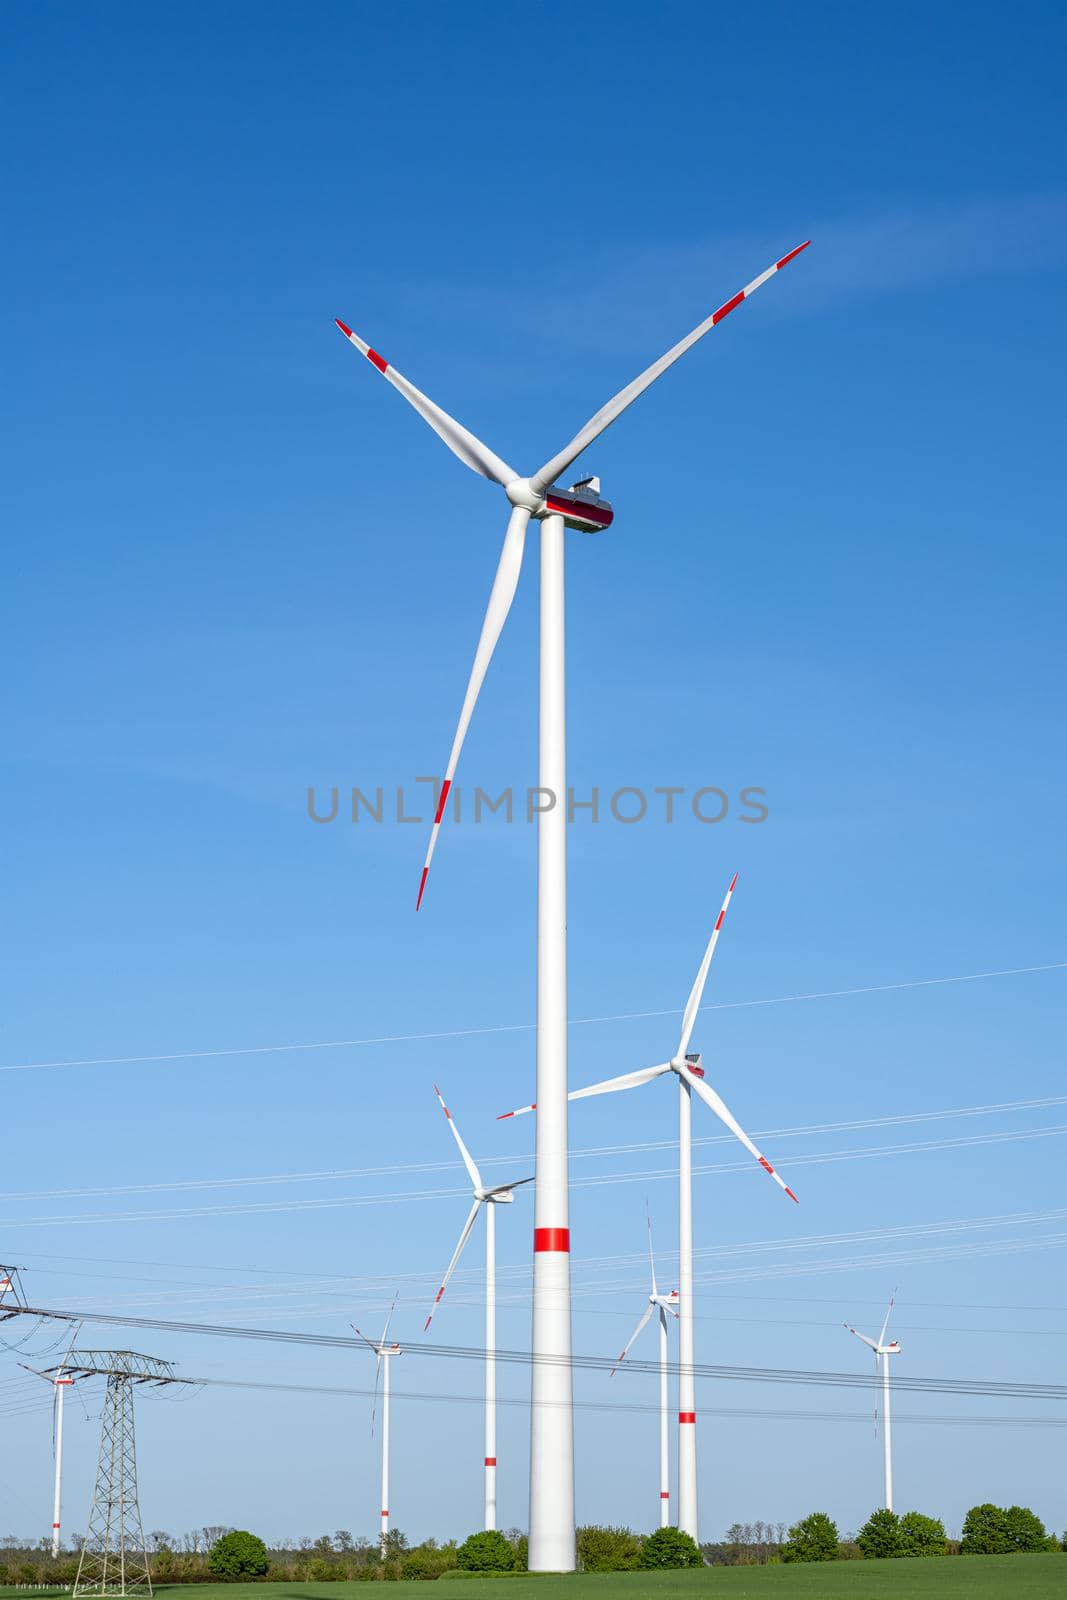 Wind turbines and power lines on a sunny day by elxeneize